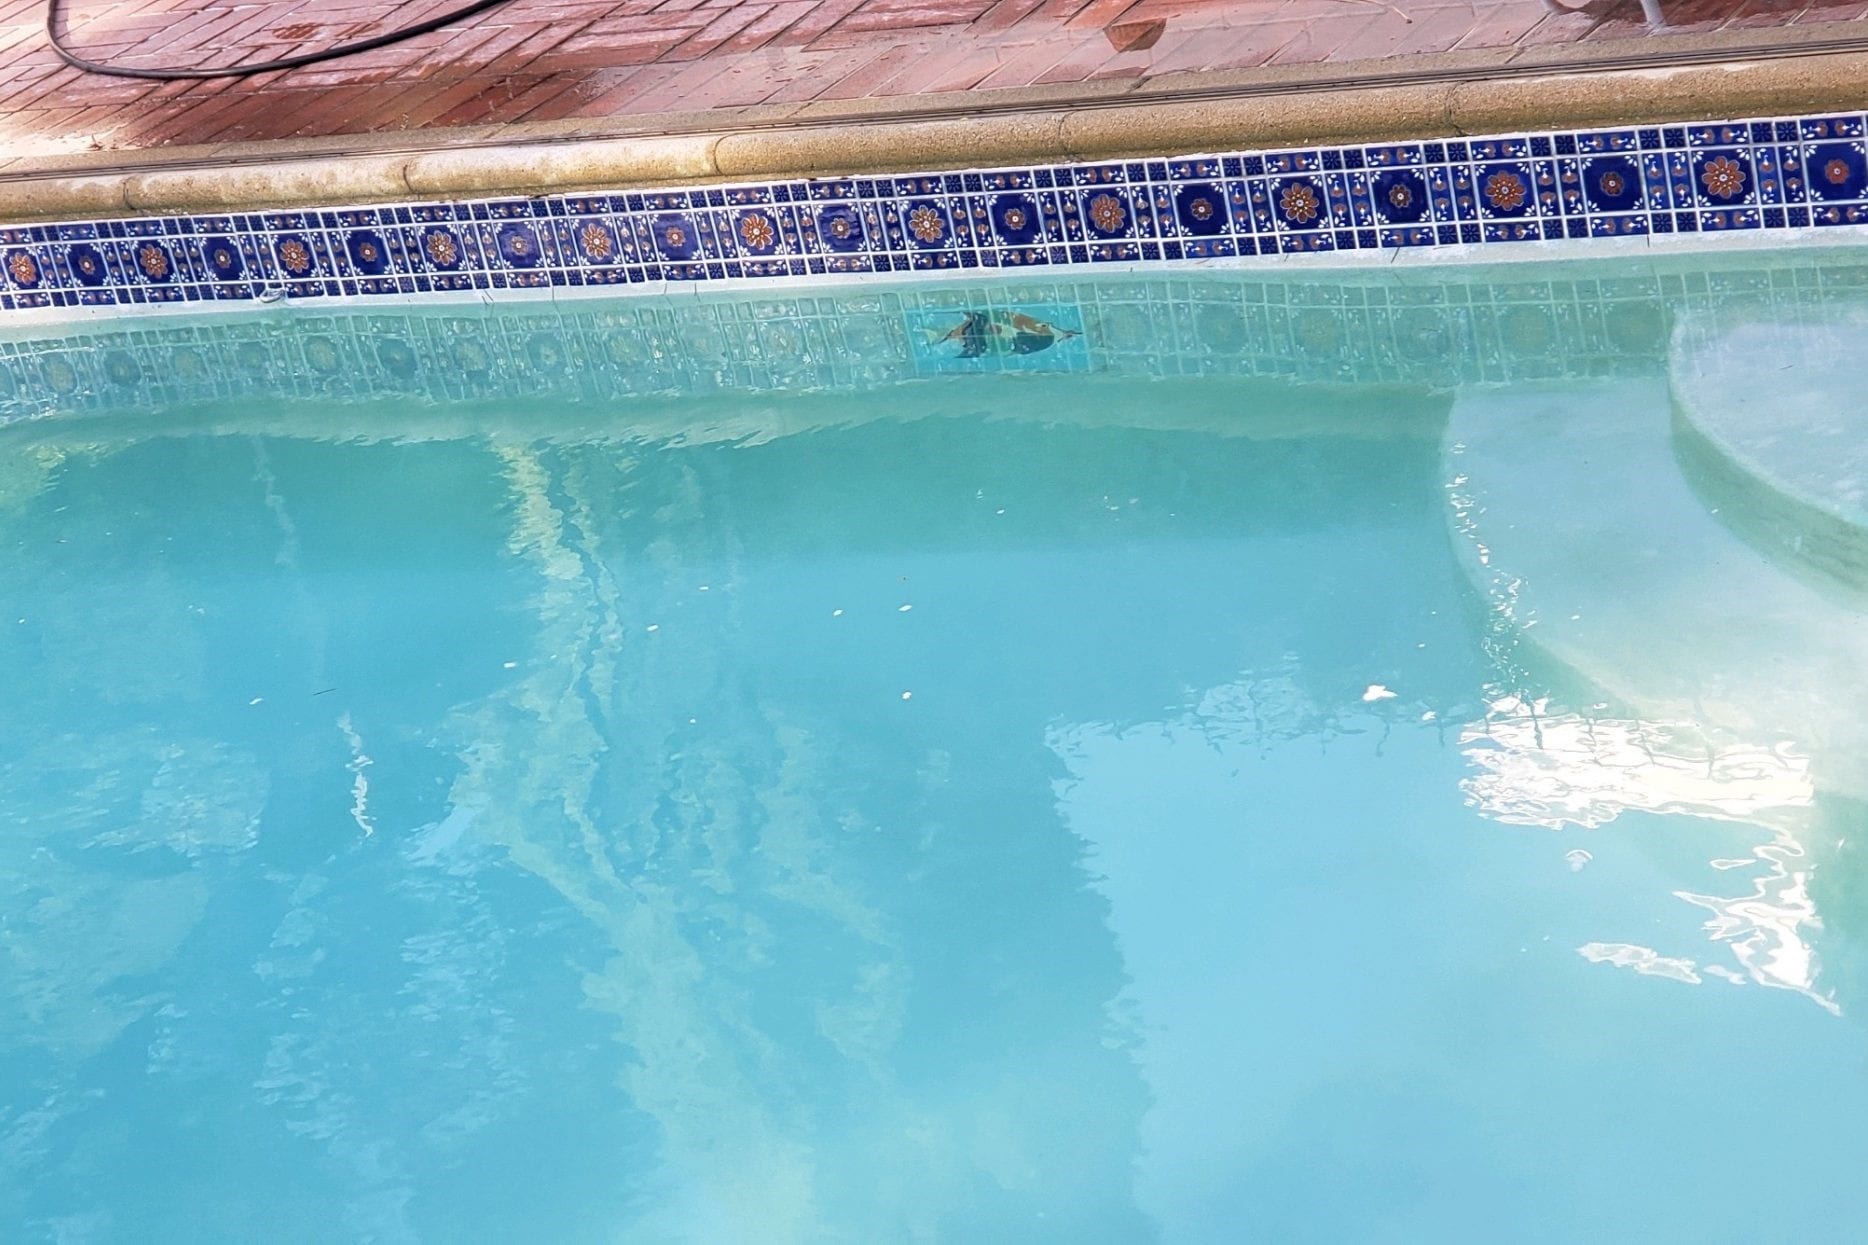 How To Remove Calcium From Swimming Pool Tiles